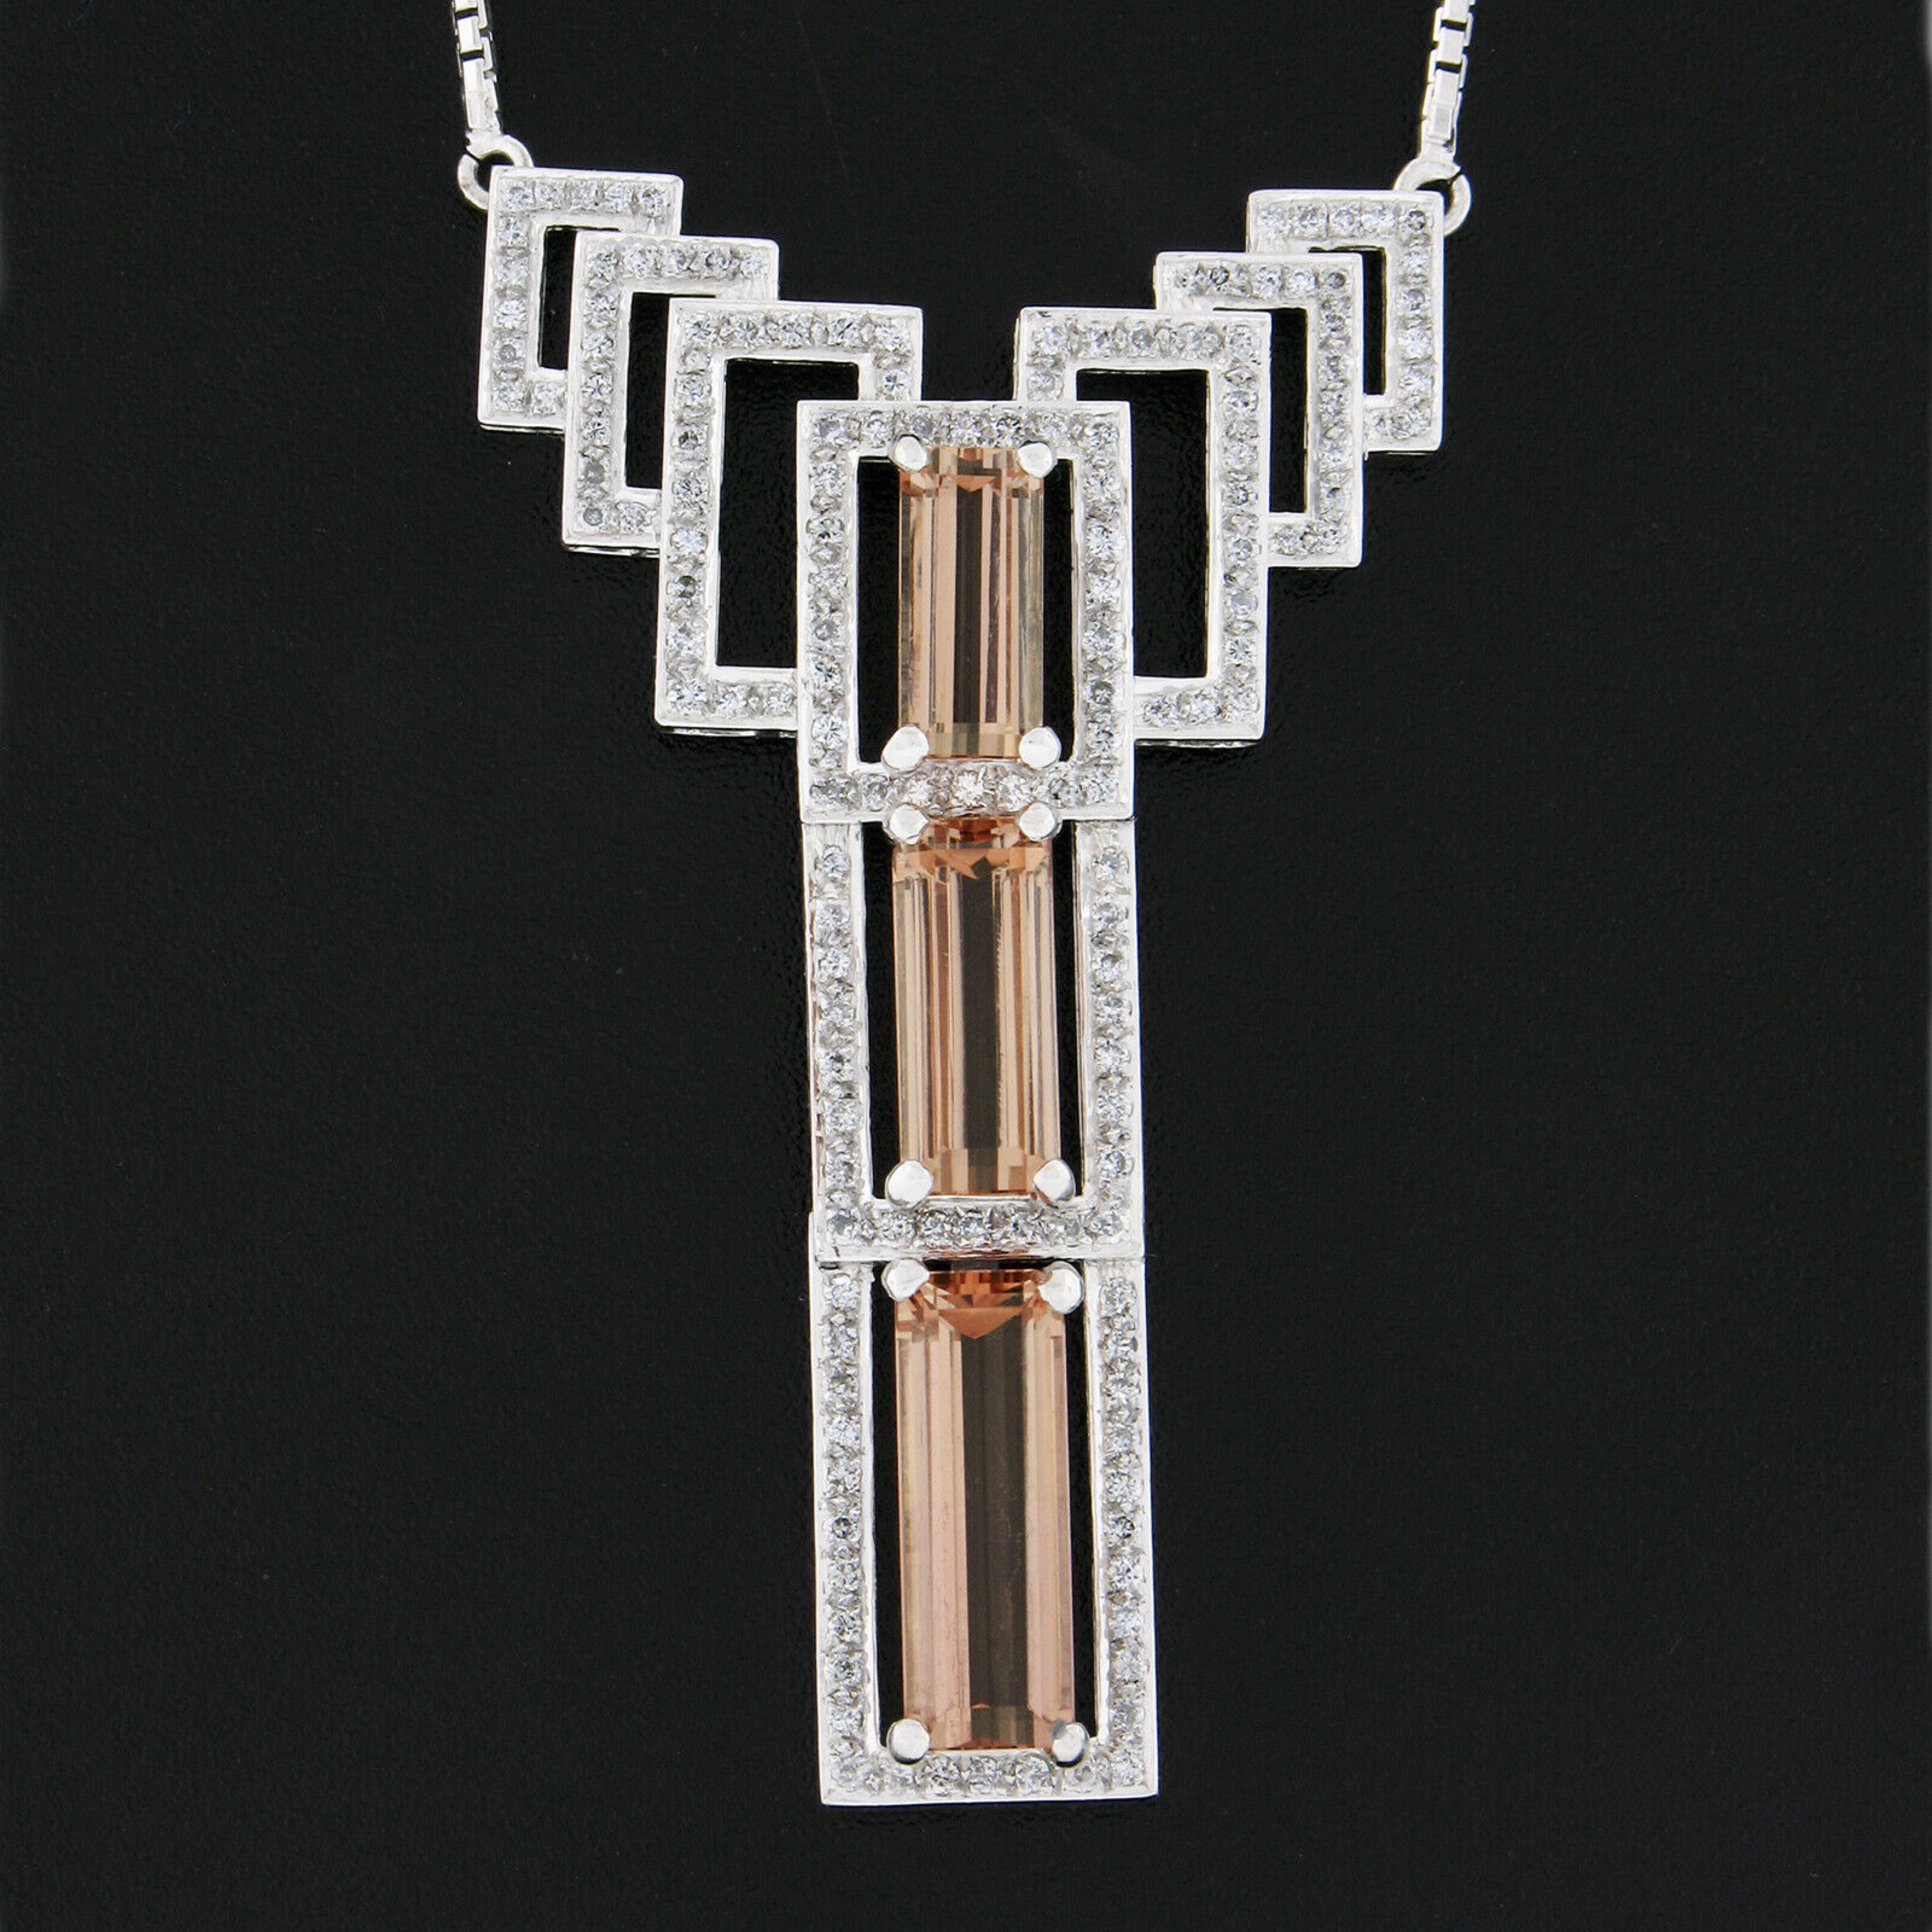 This magnificent pendant necklace is crafted from solid 18k white gold and features a large open work design drenched with very fine quality imperial topaz and diamonds throughout. The pendant carries three gorgeous imperial topaz stones, of which